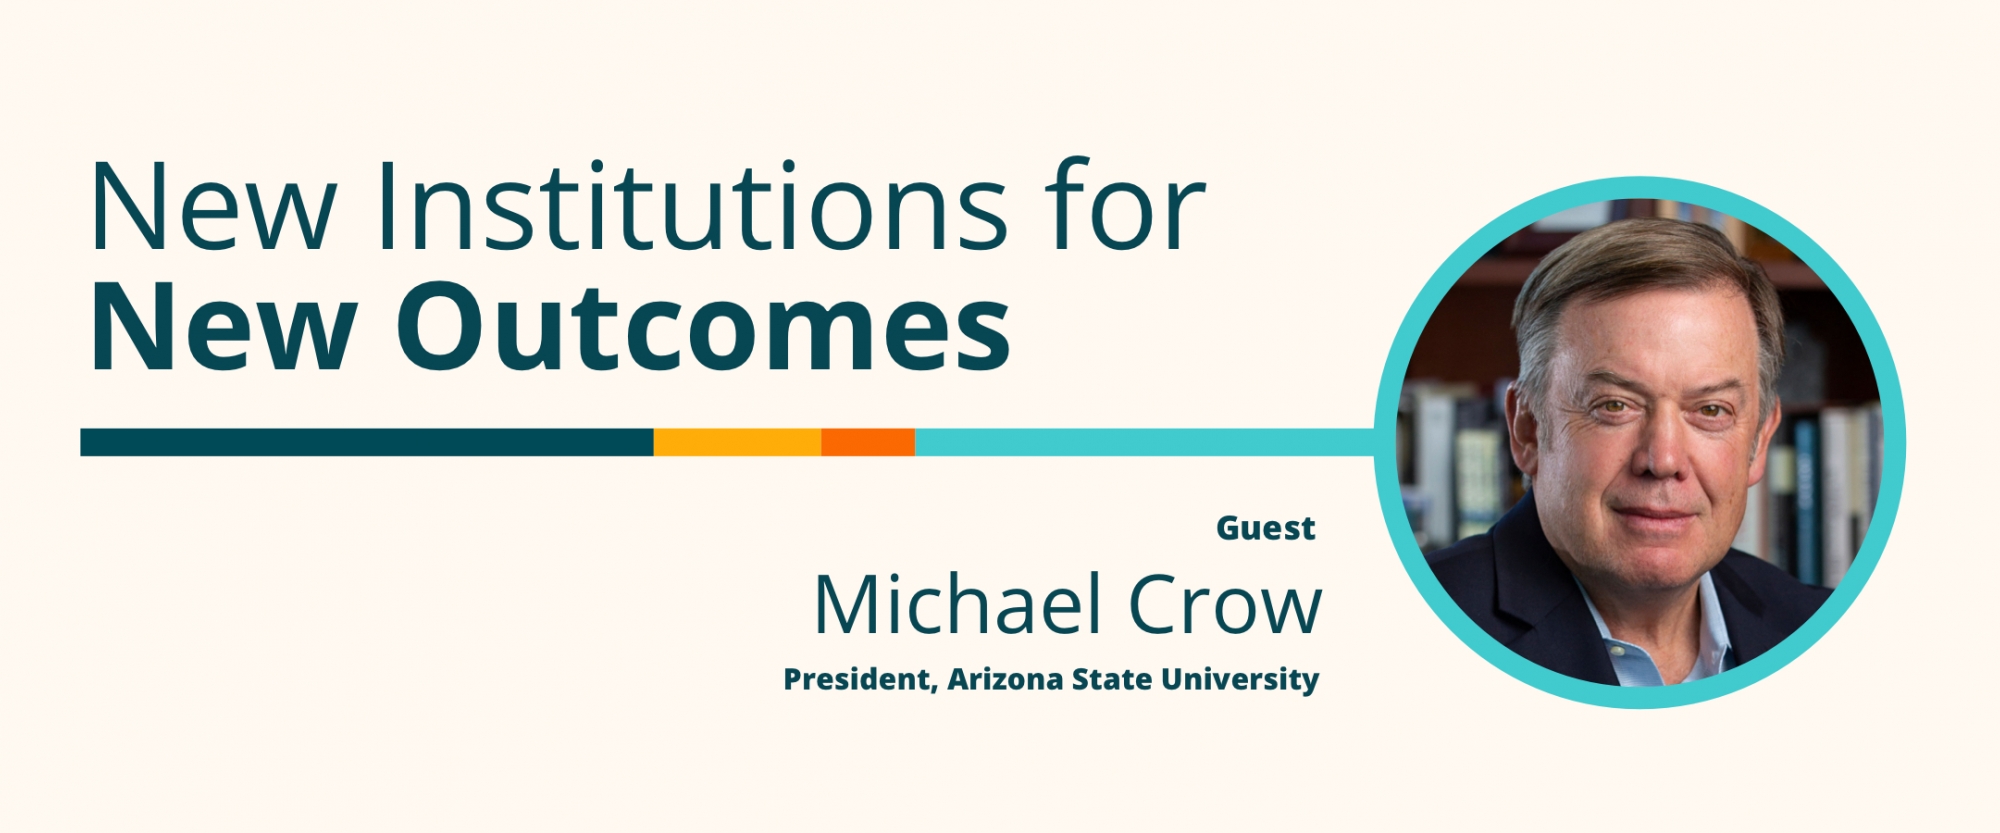 New Institutions for New Outcomes 